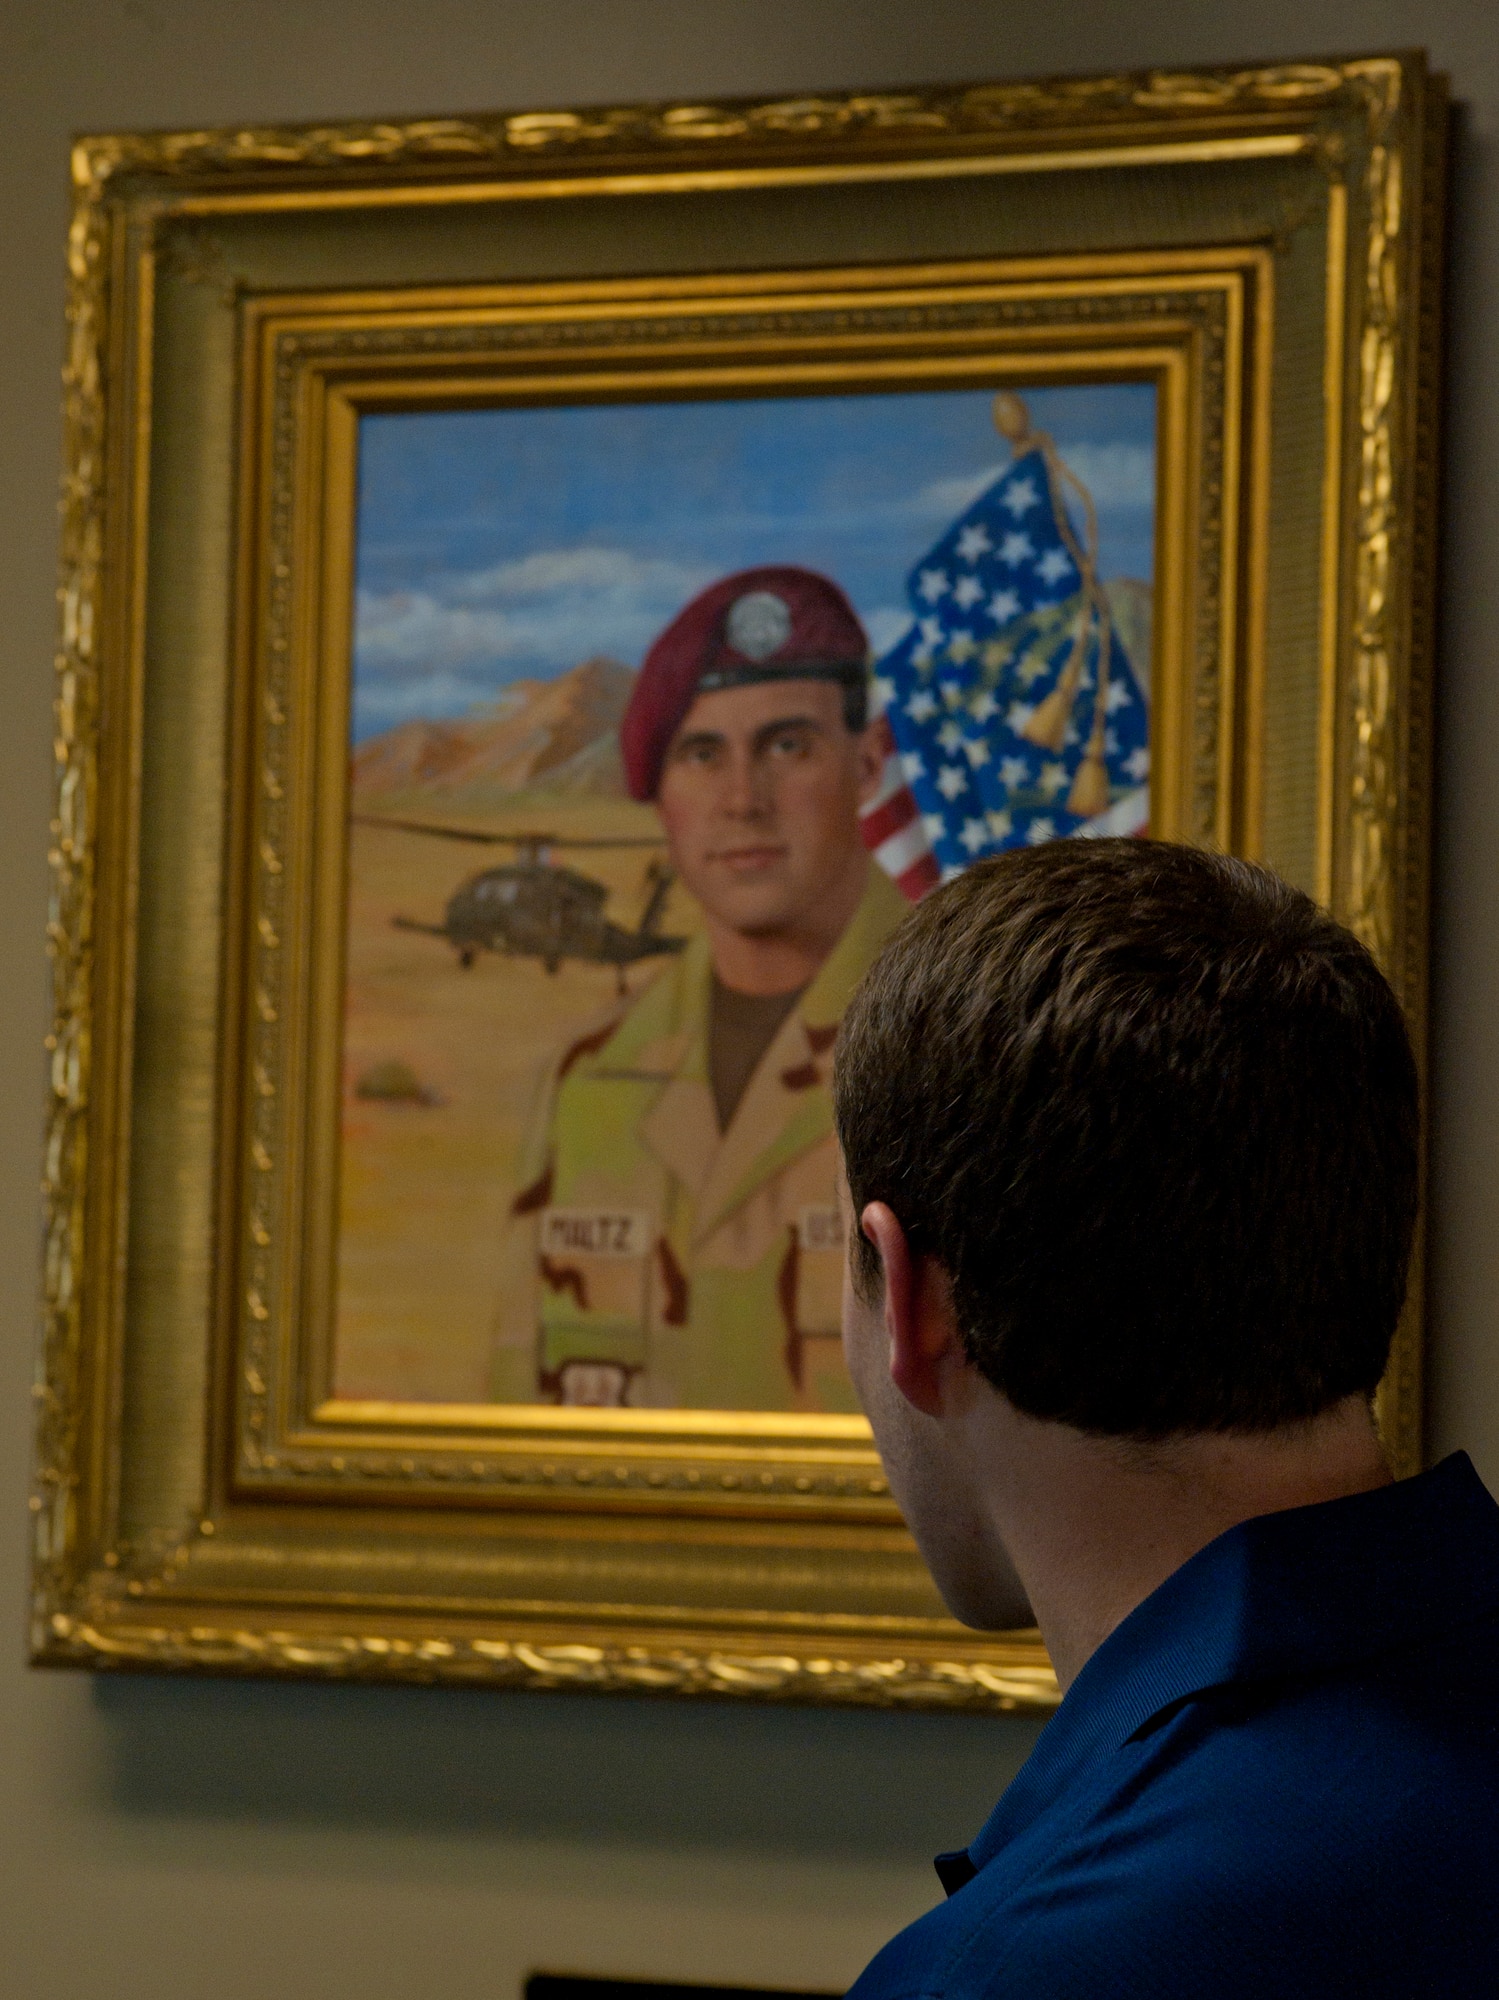 Kyle Maltz looks at a painted portrait of his father, U.S. Air Force Master Sgt. Michael Maltz, in the First Term Airmen and Professional Enhancement Center at Moody Air Force Base, Ga., Oct. 21, 2011. Sergeant Maltz was deployed from Moody to Afghanistan when he and six crew members were killed in a helicopter crash while on a mission to transport children to a hospital. (U.S. Air Force photo by Airman 1st Class Jarrod Grammel/Released)
